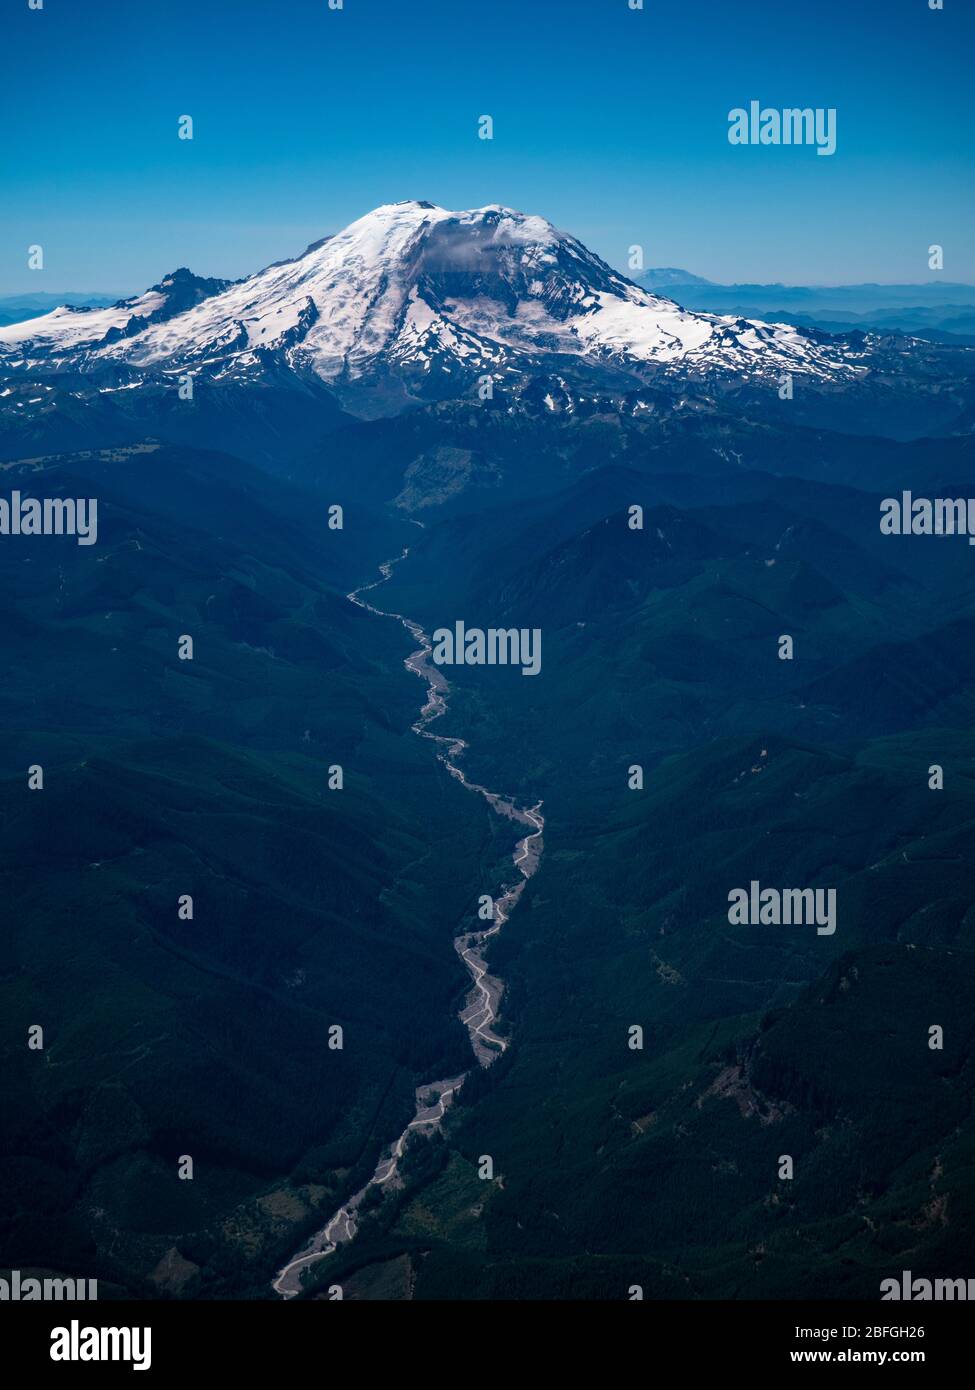 North side of Mount Rainer in Washington State Stock Photo